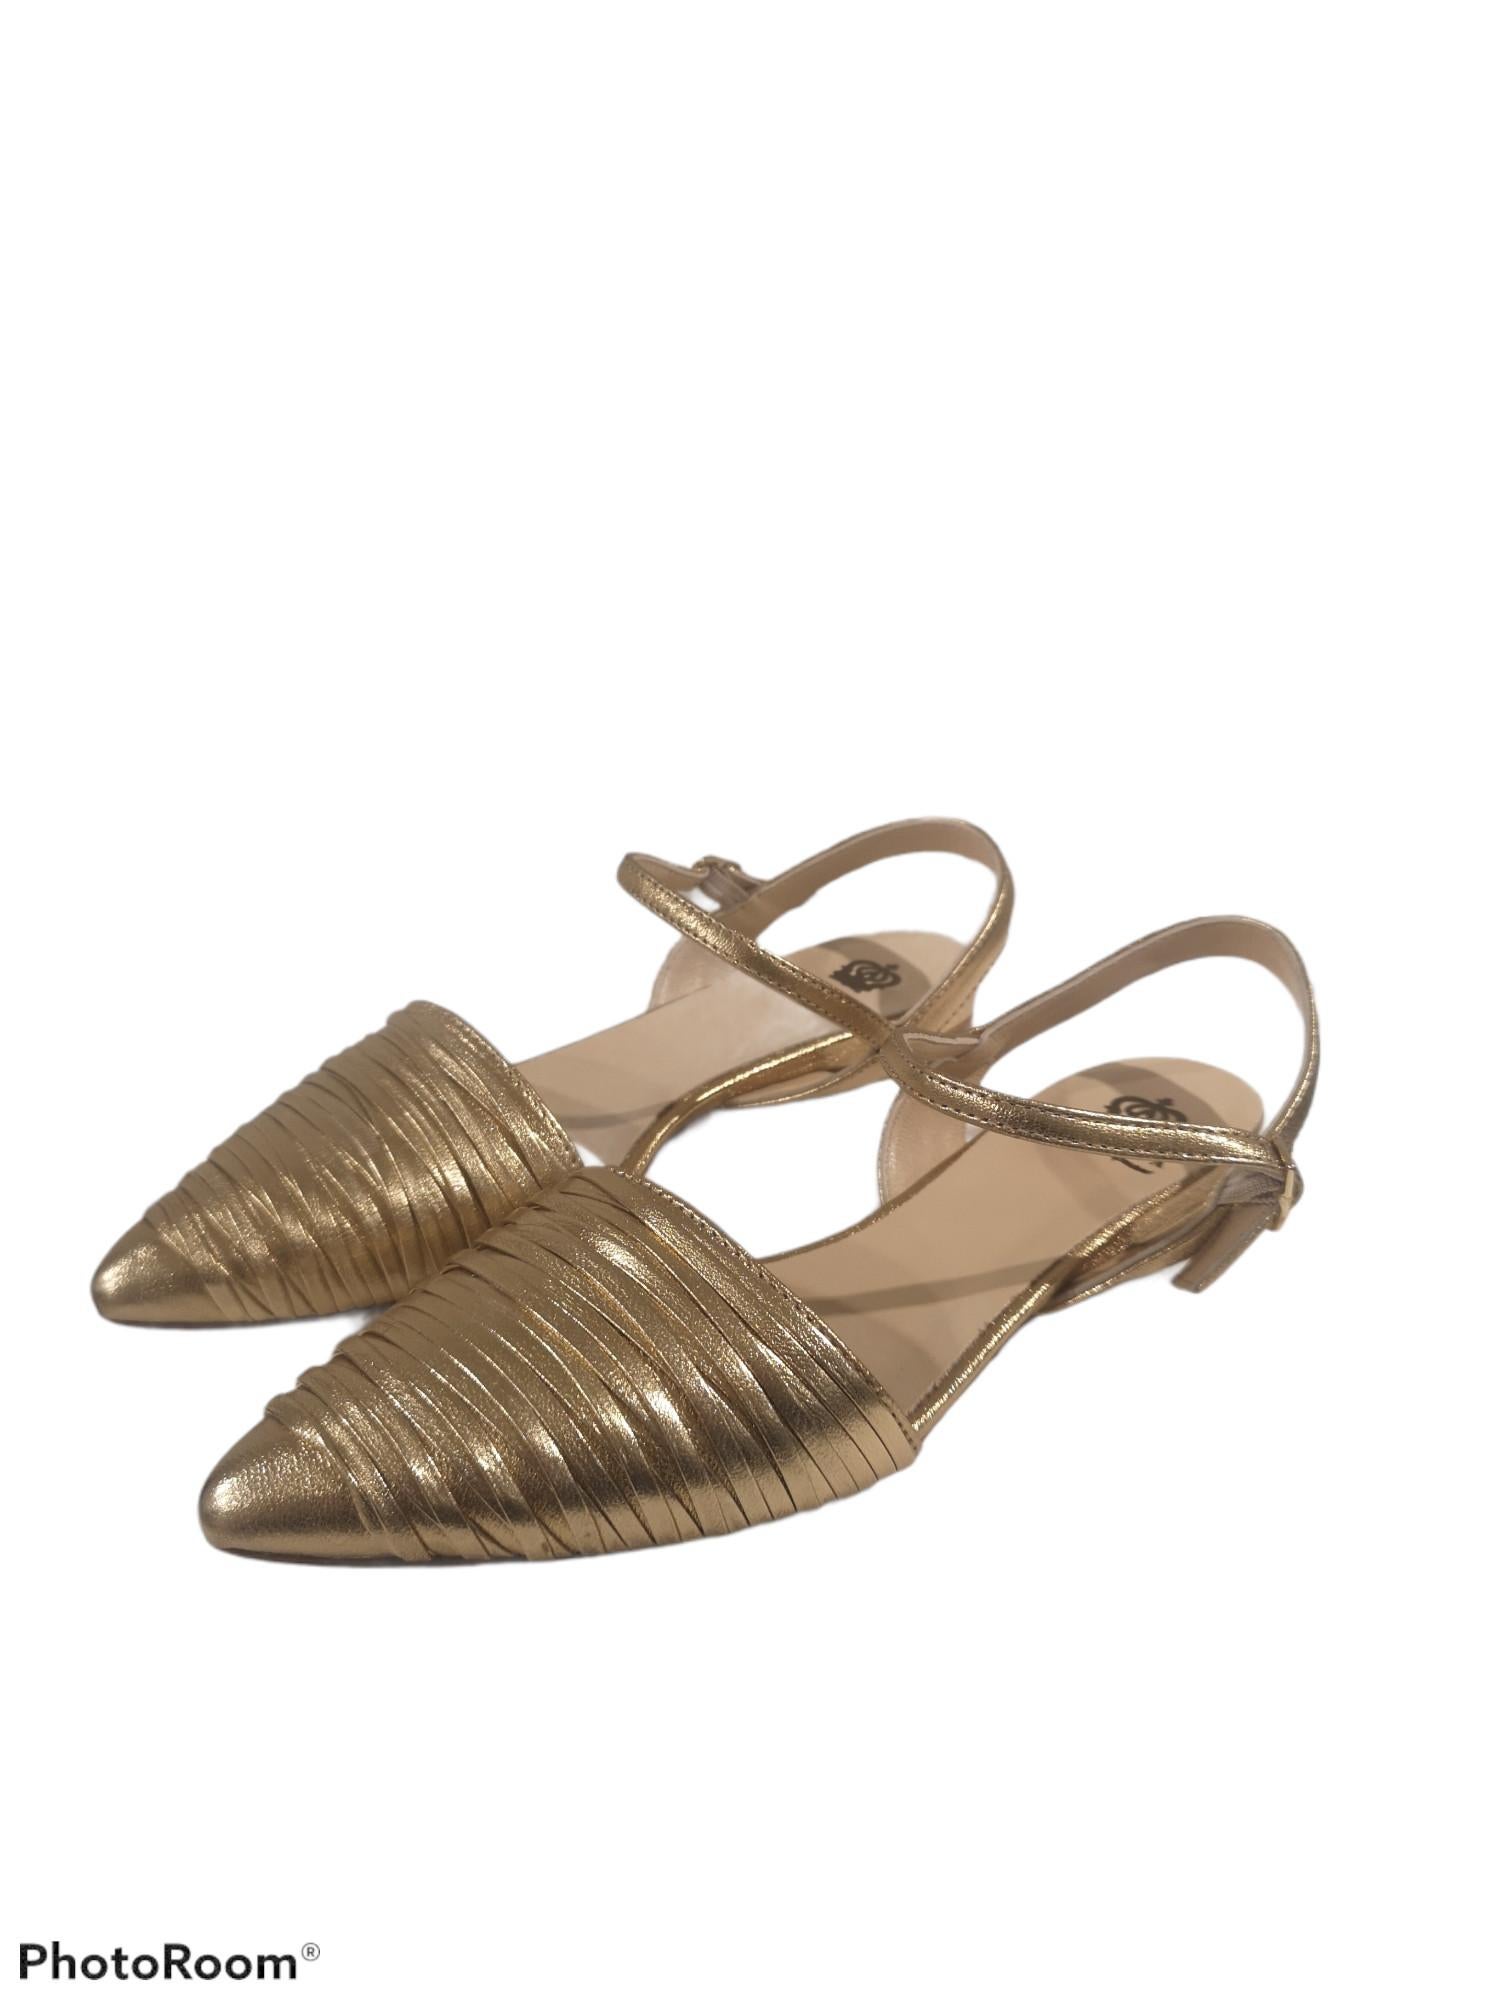 Handmade gold tone leather sandals - ballerinas
totally made in italy
size available: from 36 to 41 IT